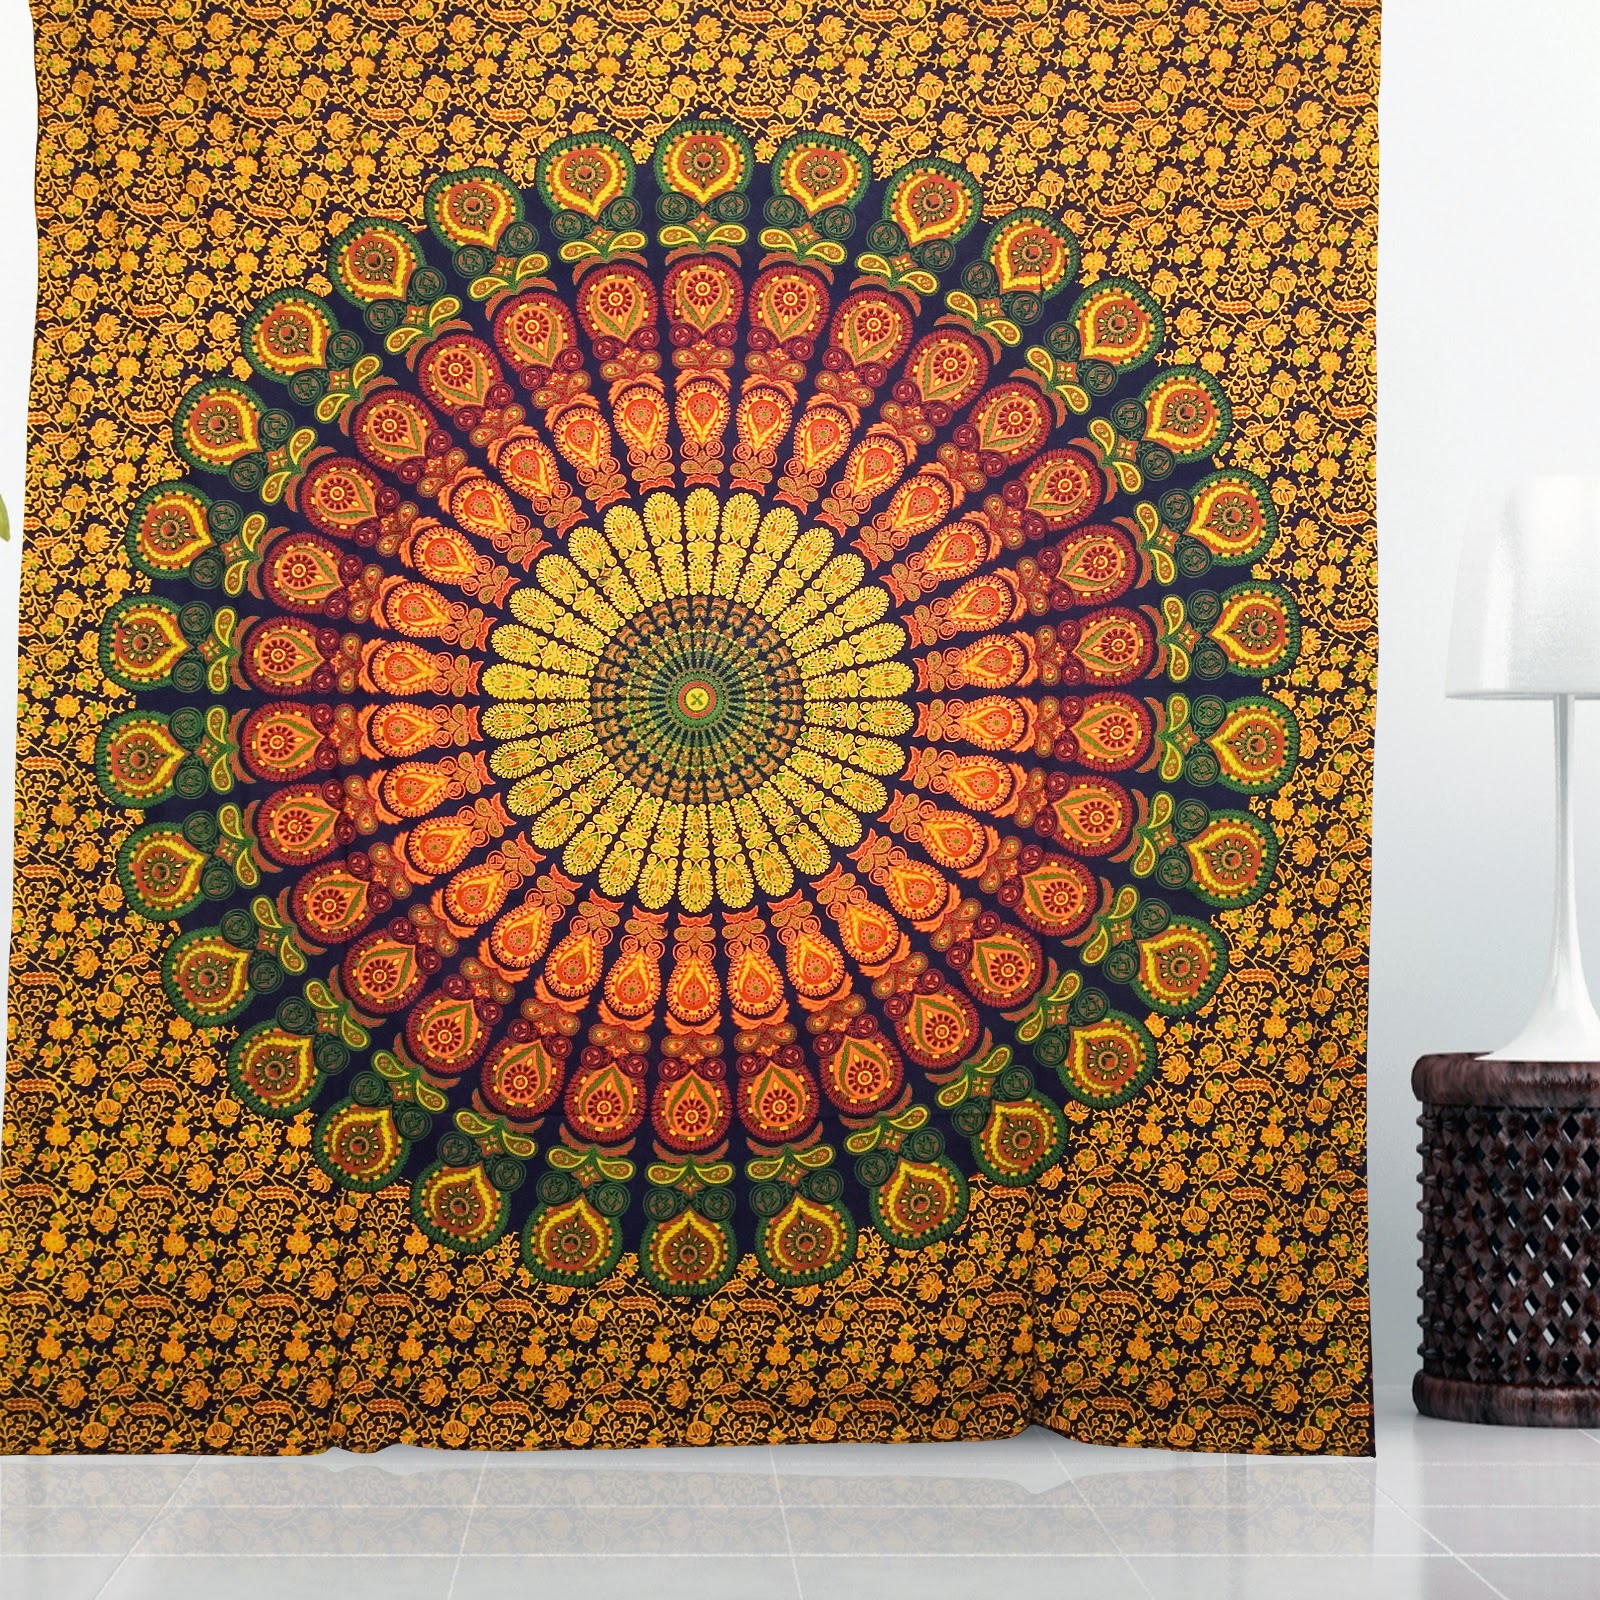  Large Wall Tapestry Mandala Hippie Bedding Indian Tapestries Block Print Table Cloth Beach Tapestry Ceiling Stylish Wall Decor Bohemian